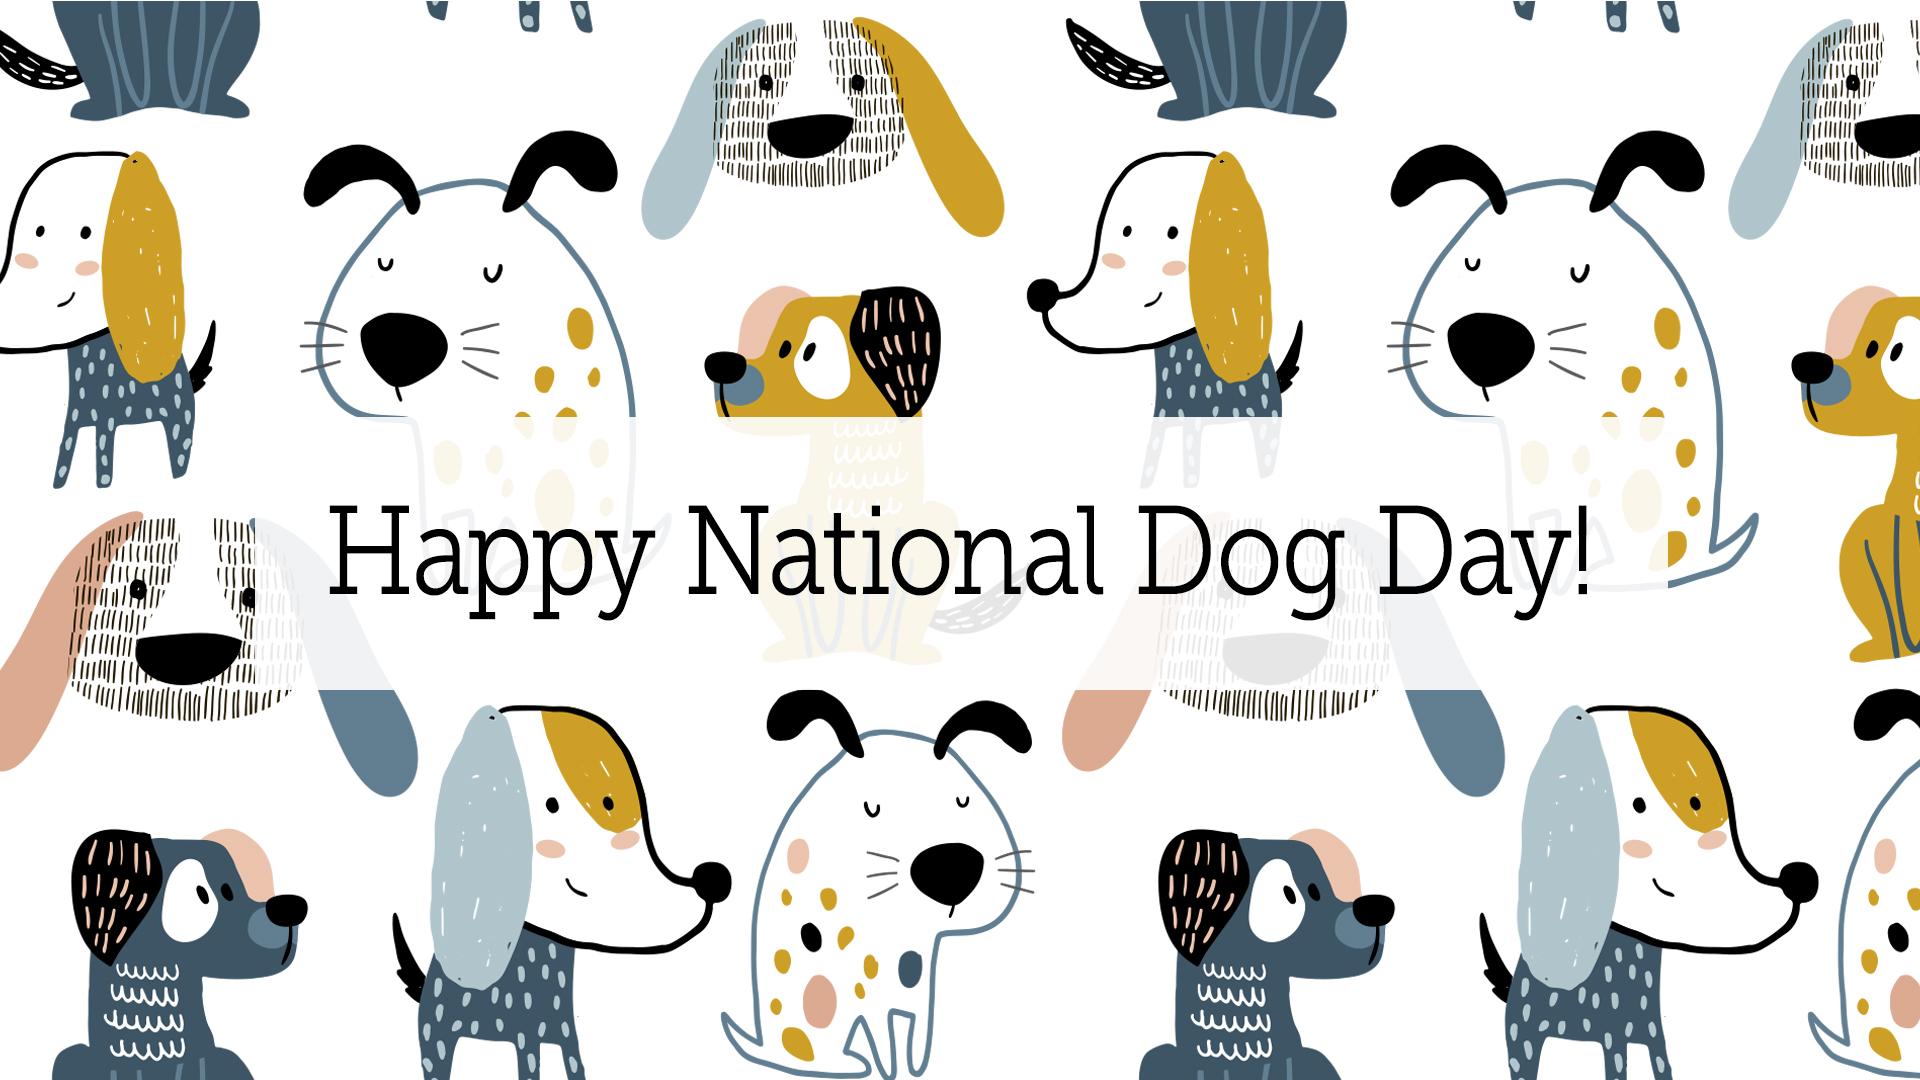 Happy NAtional Dog Day, illustrated pups